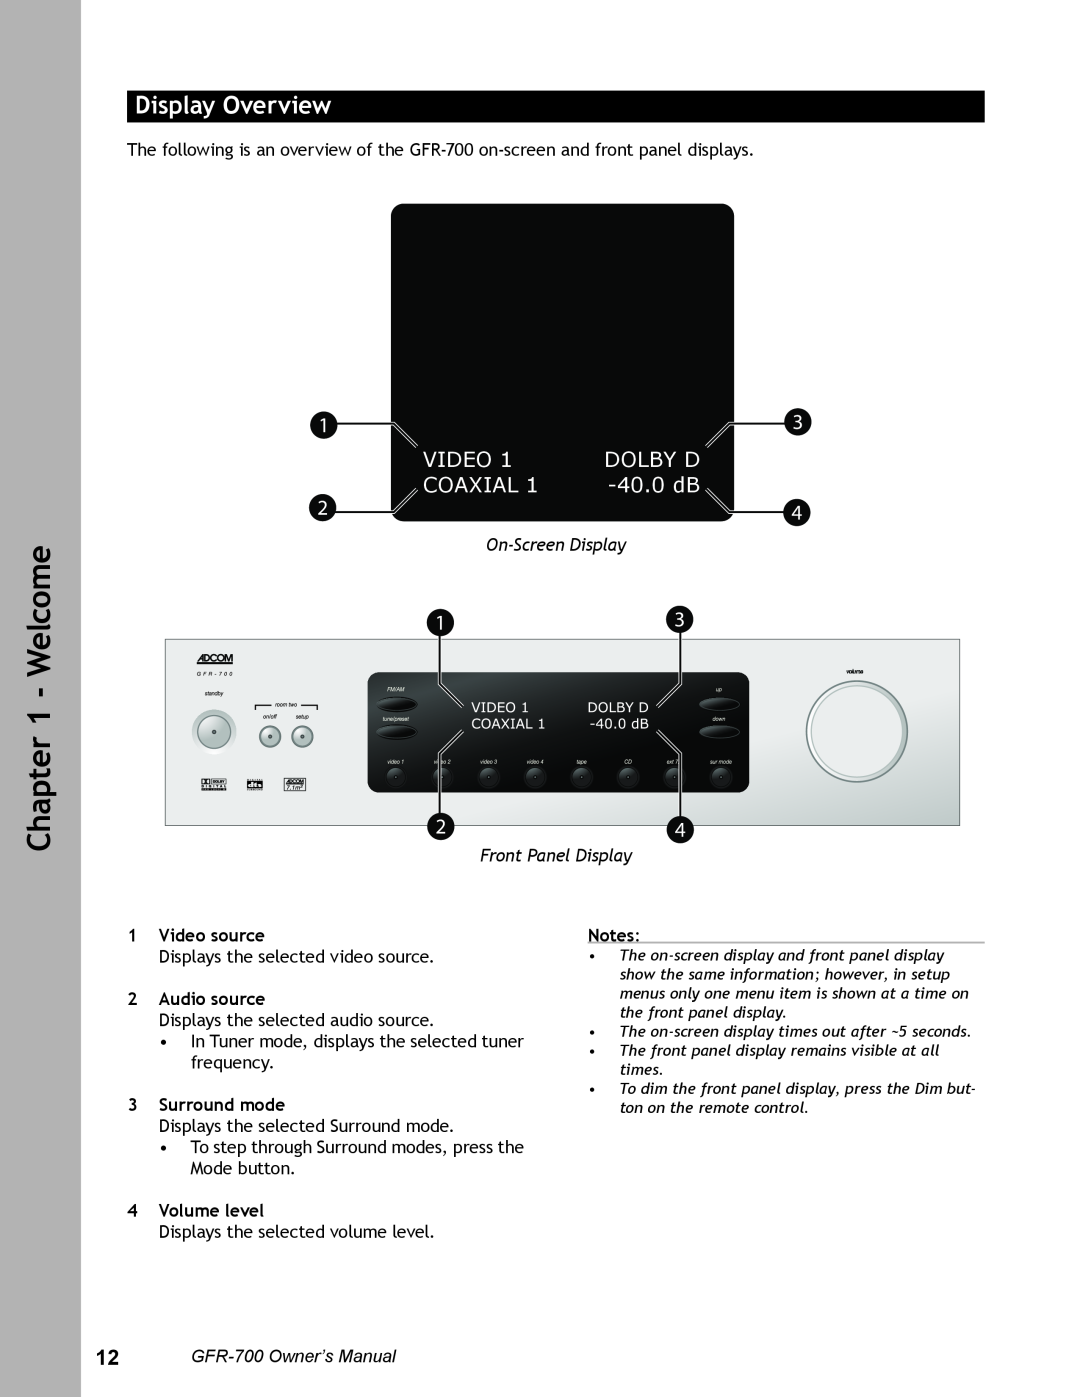 Adcom GFR-700 Display Overview, On-ScreenDisplay Front Panel Display, 1Video source, 2Audio source, 3Surround mode, 40.0dB 